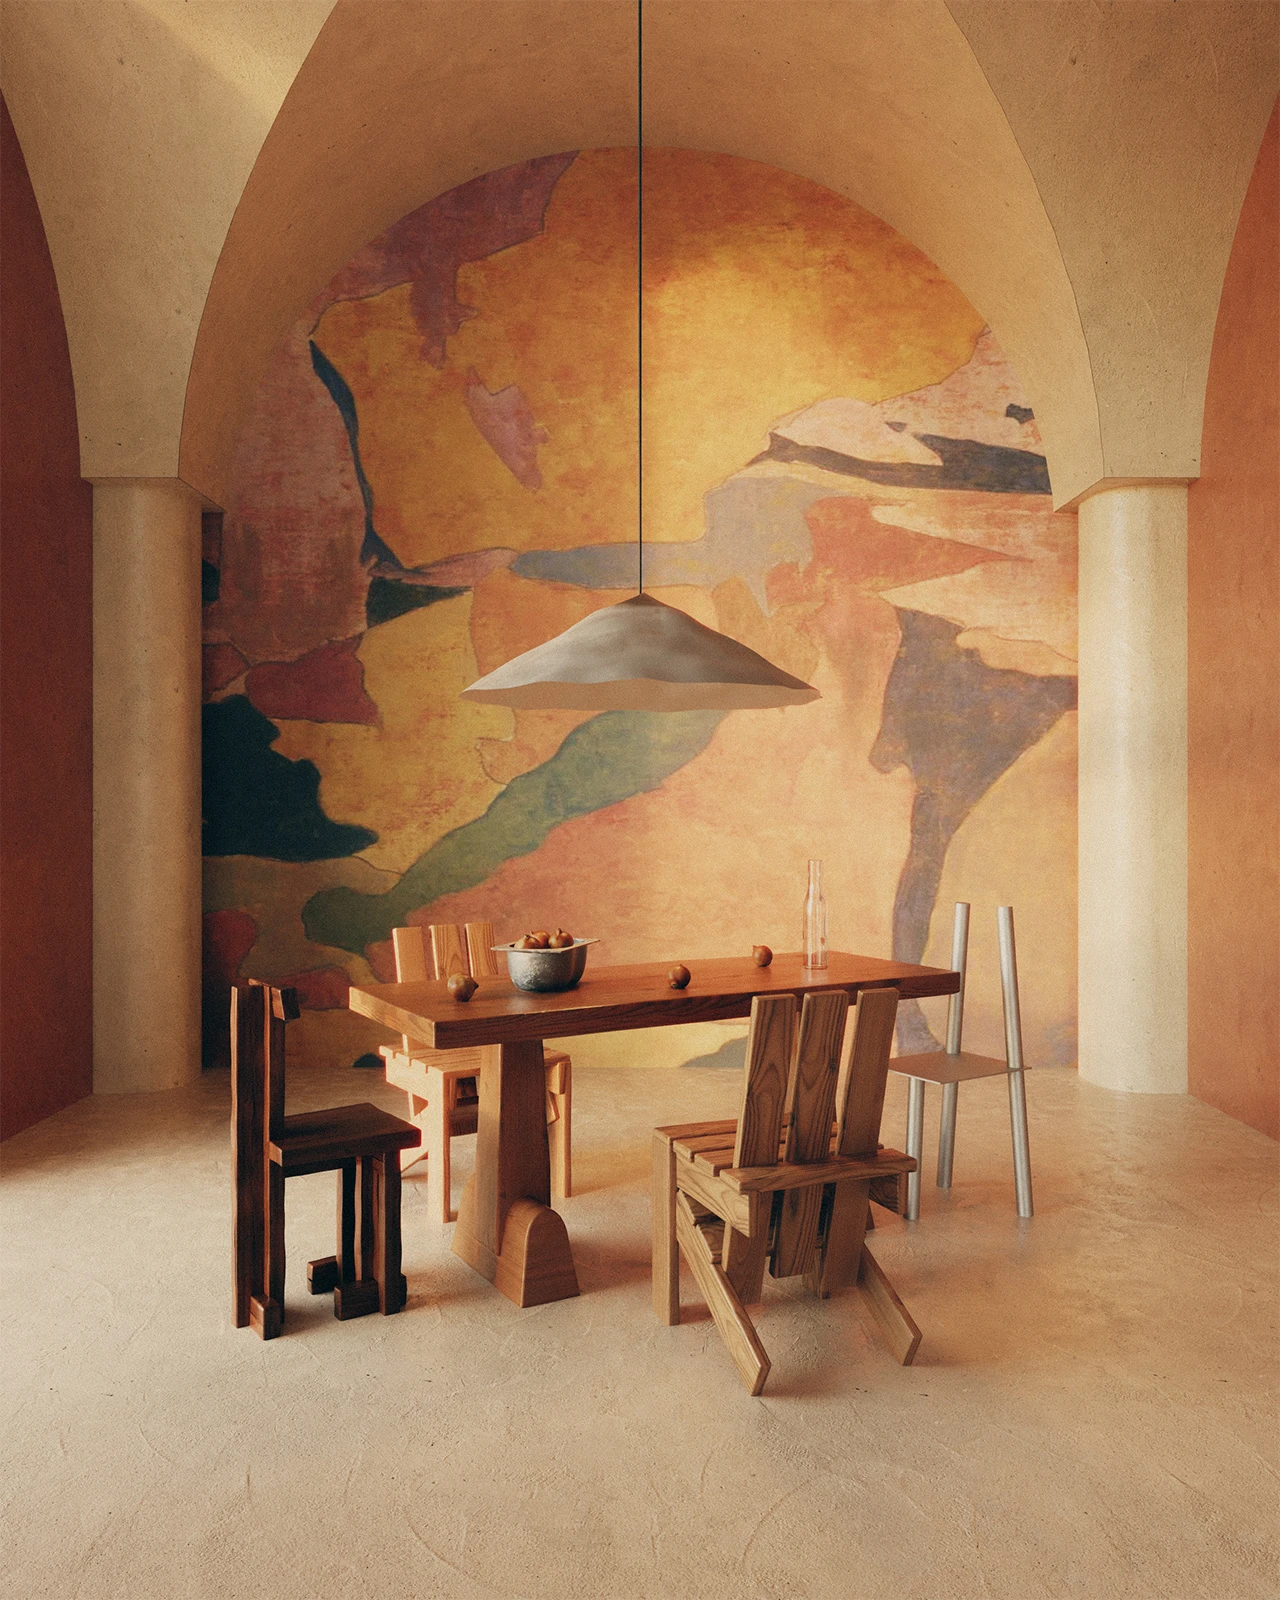 Dining scene with mural